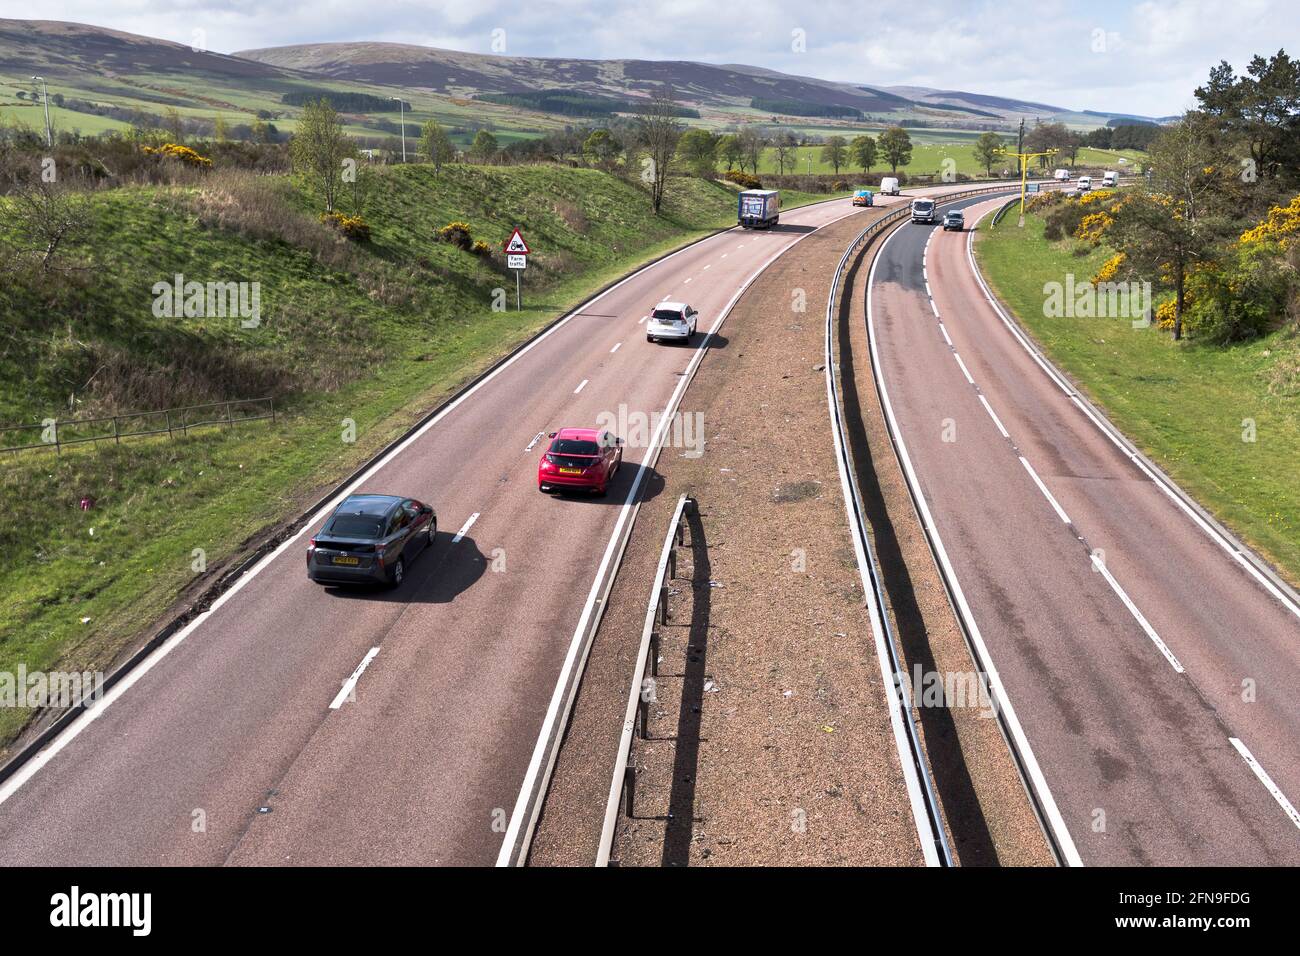 dh  A9 PERTHSHIRE Scottish road dual carriageway scotland country car traffic uk Stock Photo